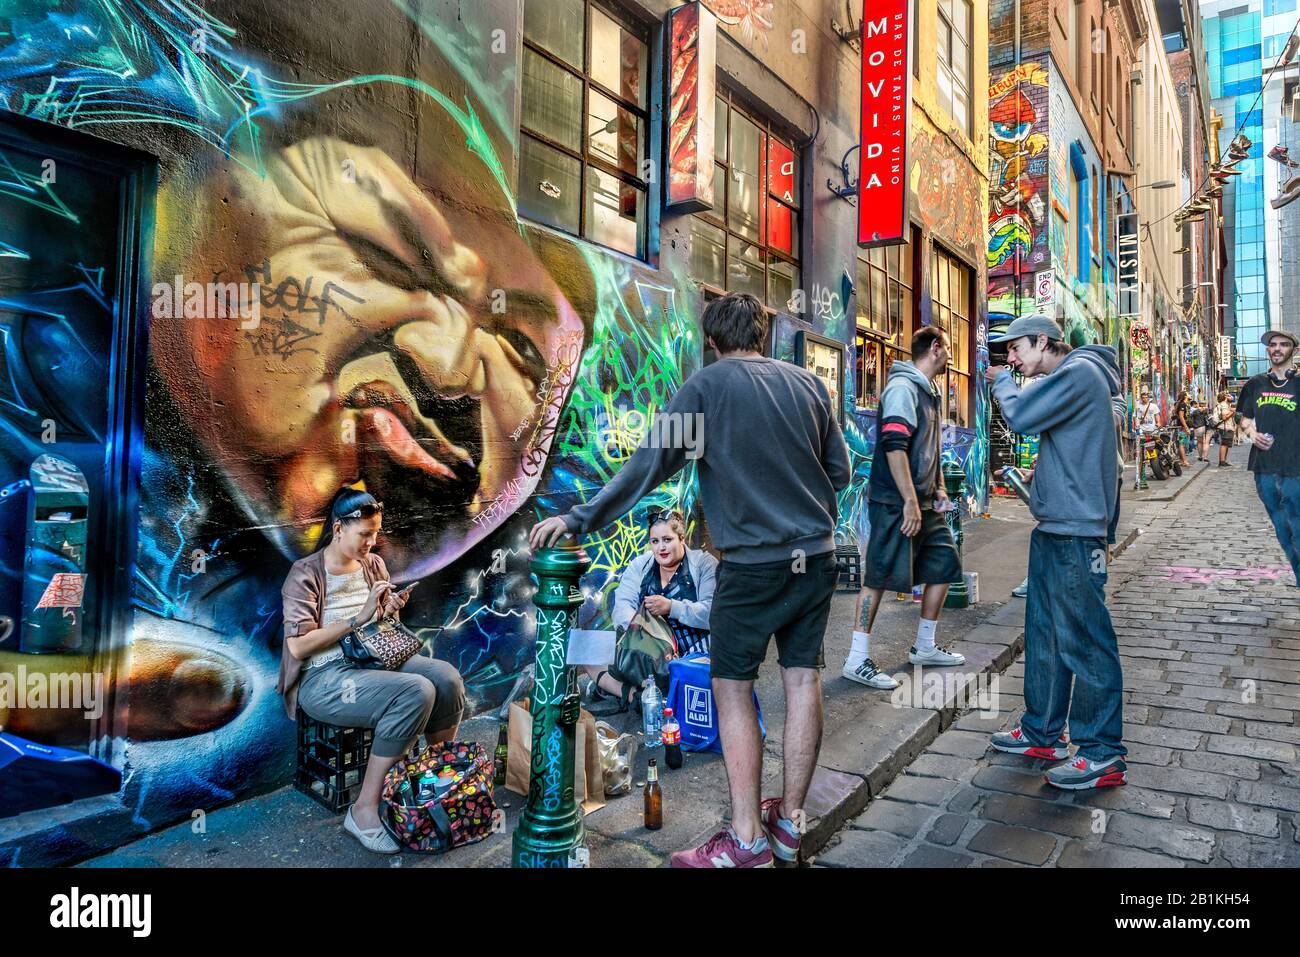 Young people and graffiti artsts, hanging out together down cobbled stone alley way, Hosier Street, Melbourne Lanes, Melbourne, Victoria, Australia Stock Photo